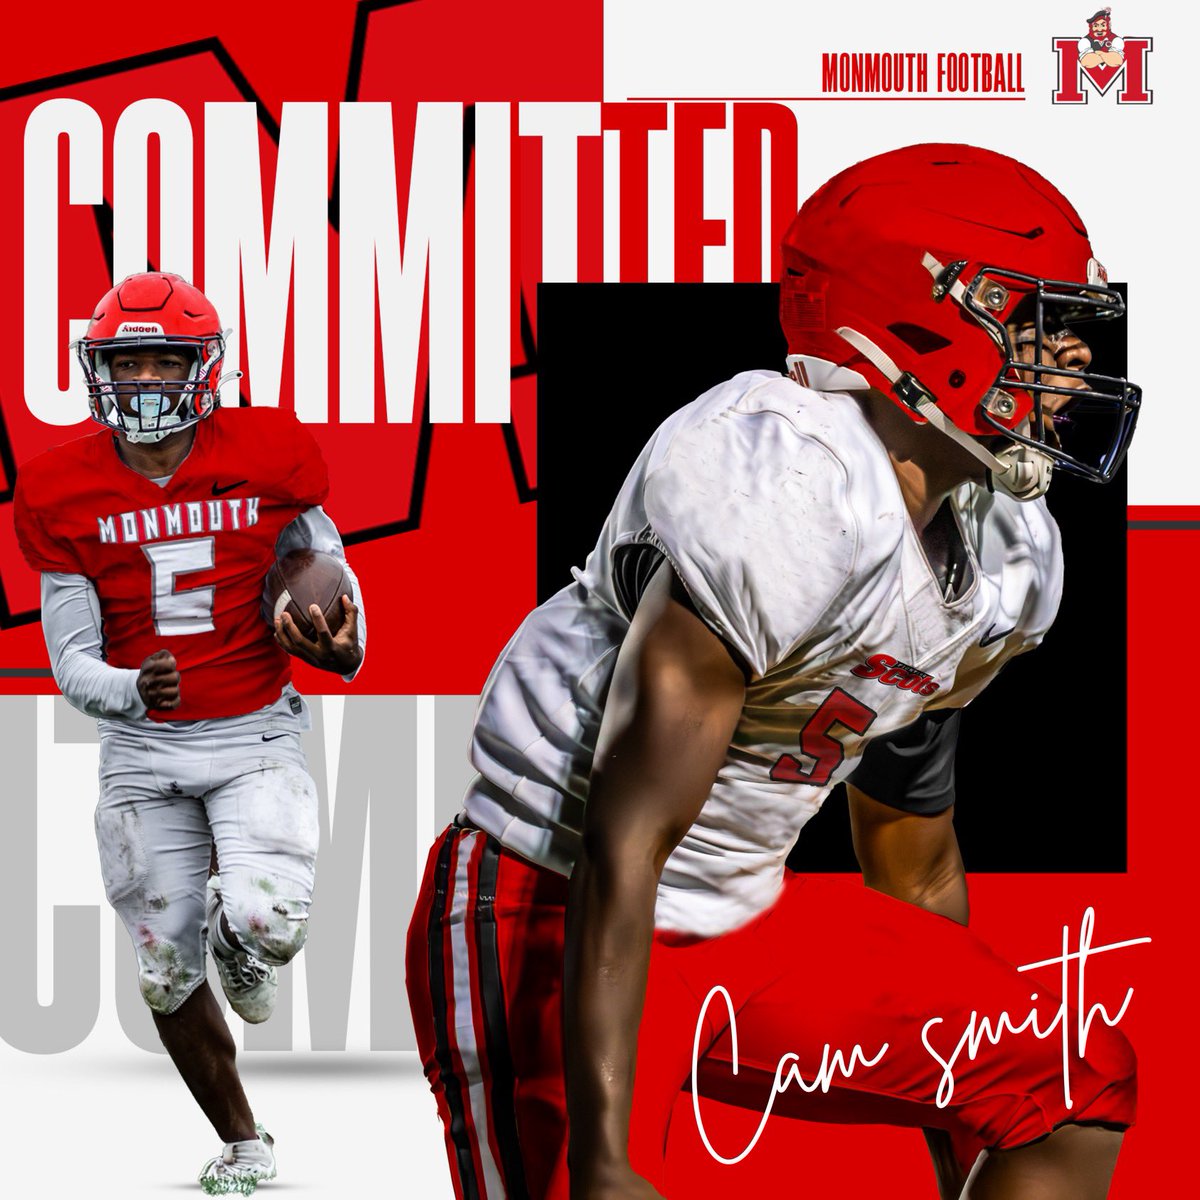 After a great conversation with @CoachN8Graham and my family i am blessed to say i am 110% Committed to Monmouth College